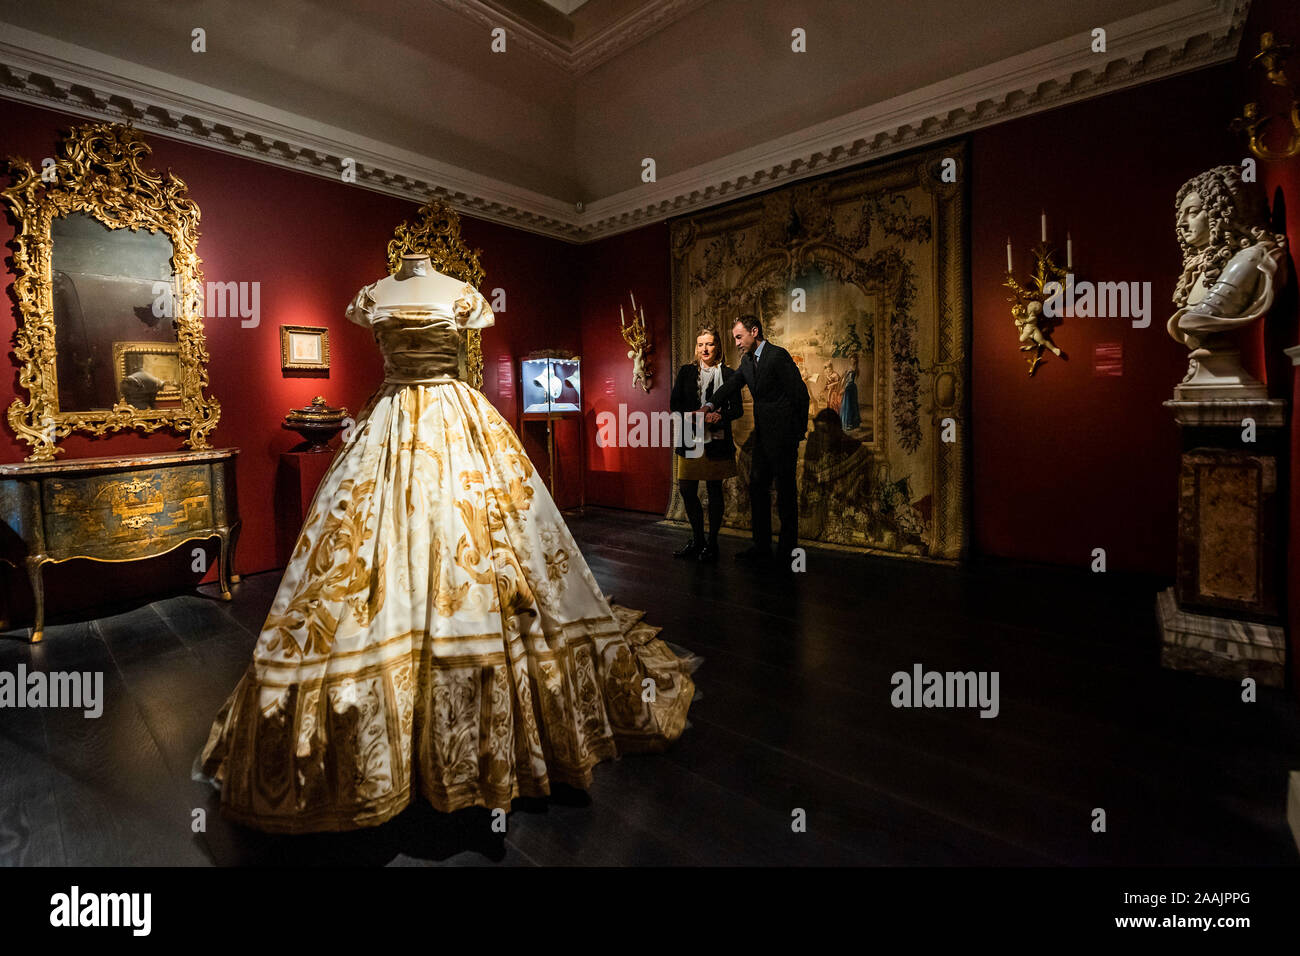 Christie's, London, UK. 22nd Nov 2019. Dolce&Gabanna Alta Moda Corset dress and private sale works - Christies previews Old Master Paintings and Decorative Arts, curated alongside couture garments and jewels from Dolce&Gabbana's Alta Moda and Alta Gioielleria Collections, tracing the enduring influence on fashion of centuries-old canvases and sartorial flourishes inspired by history. Credit: Guy Bell/Alamy Live News Stock Photo